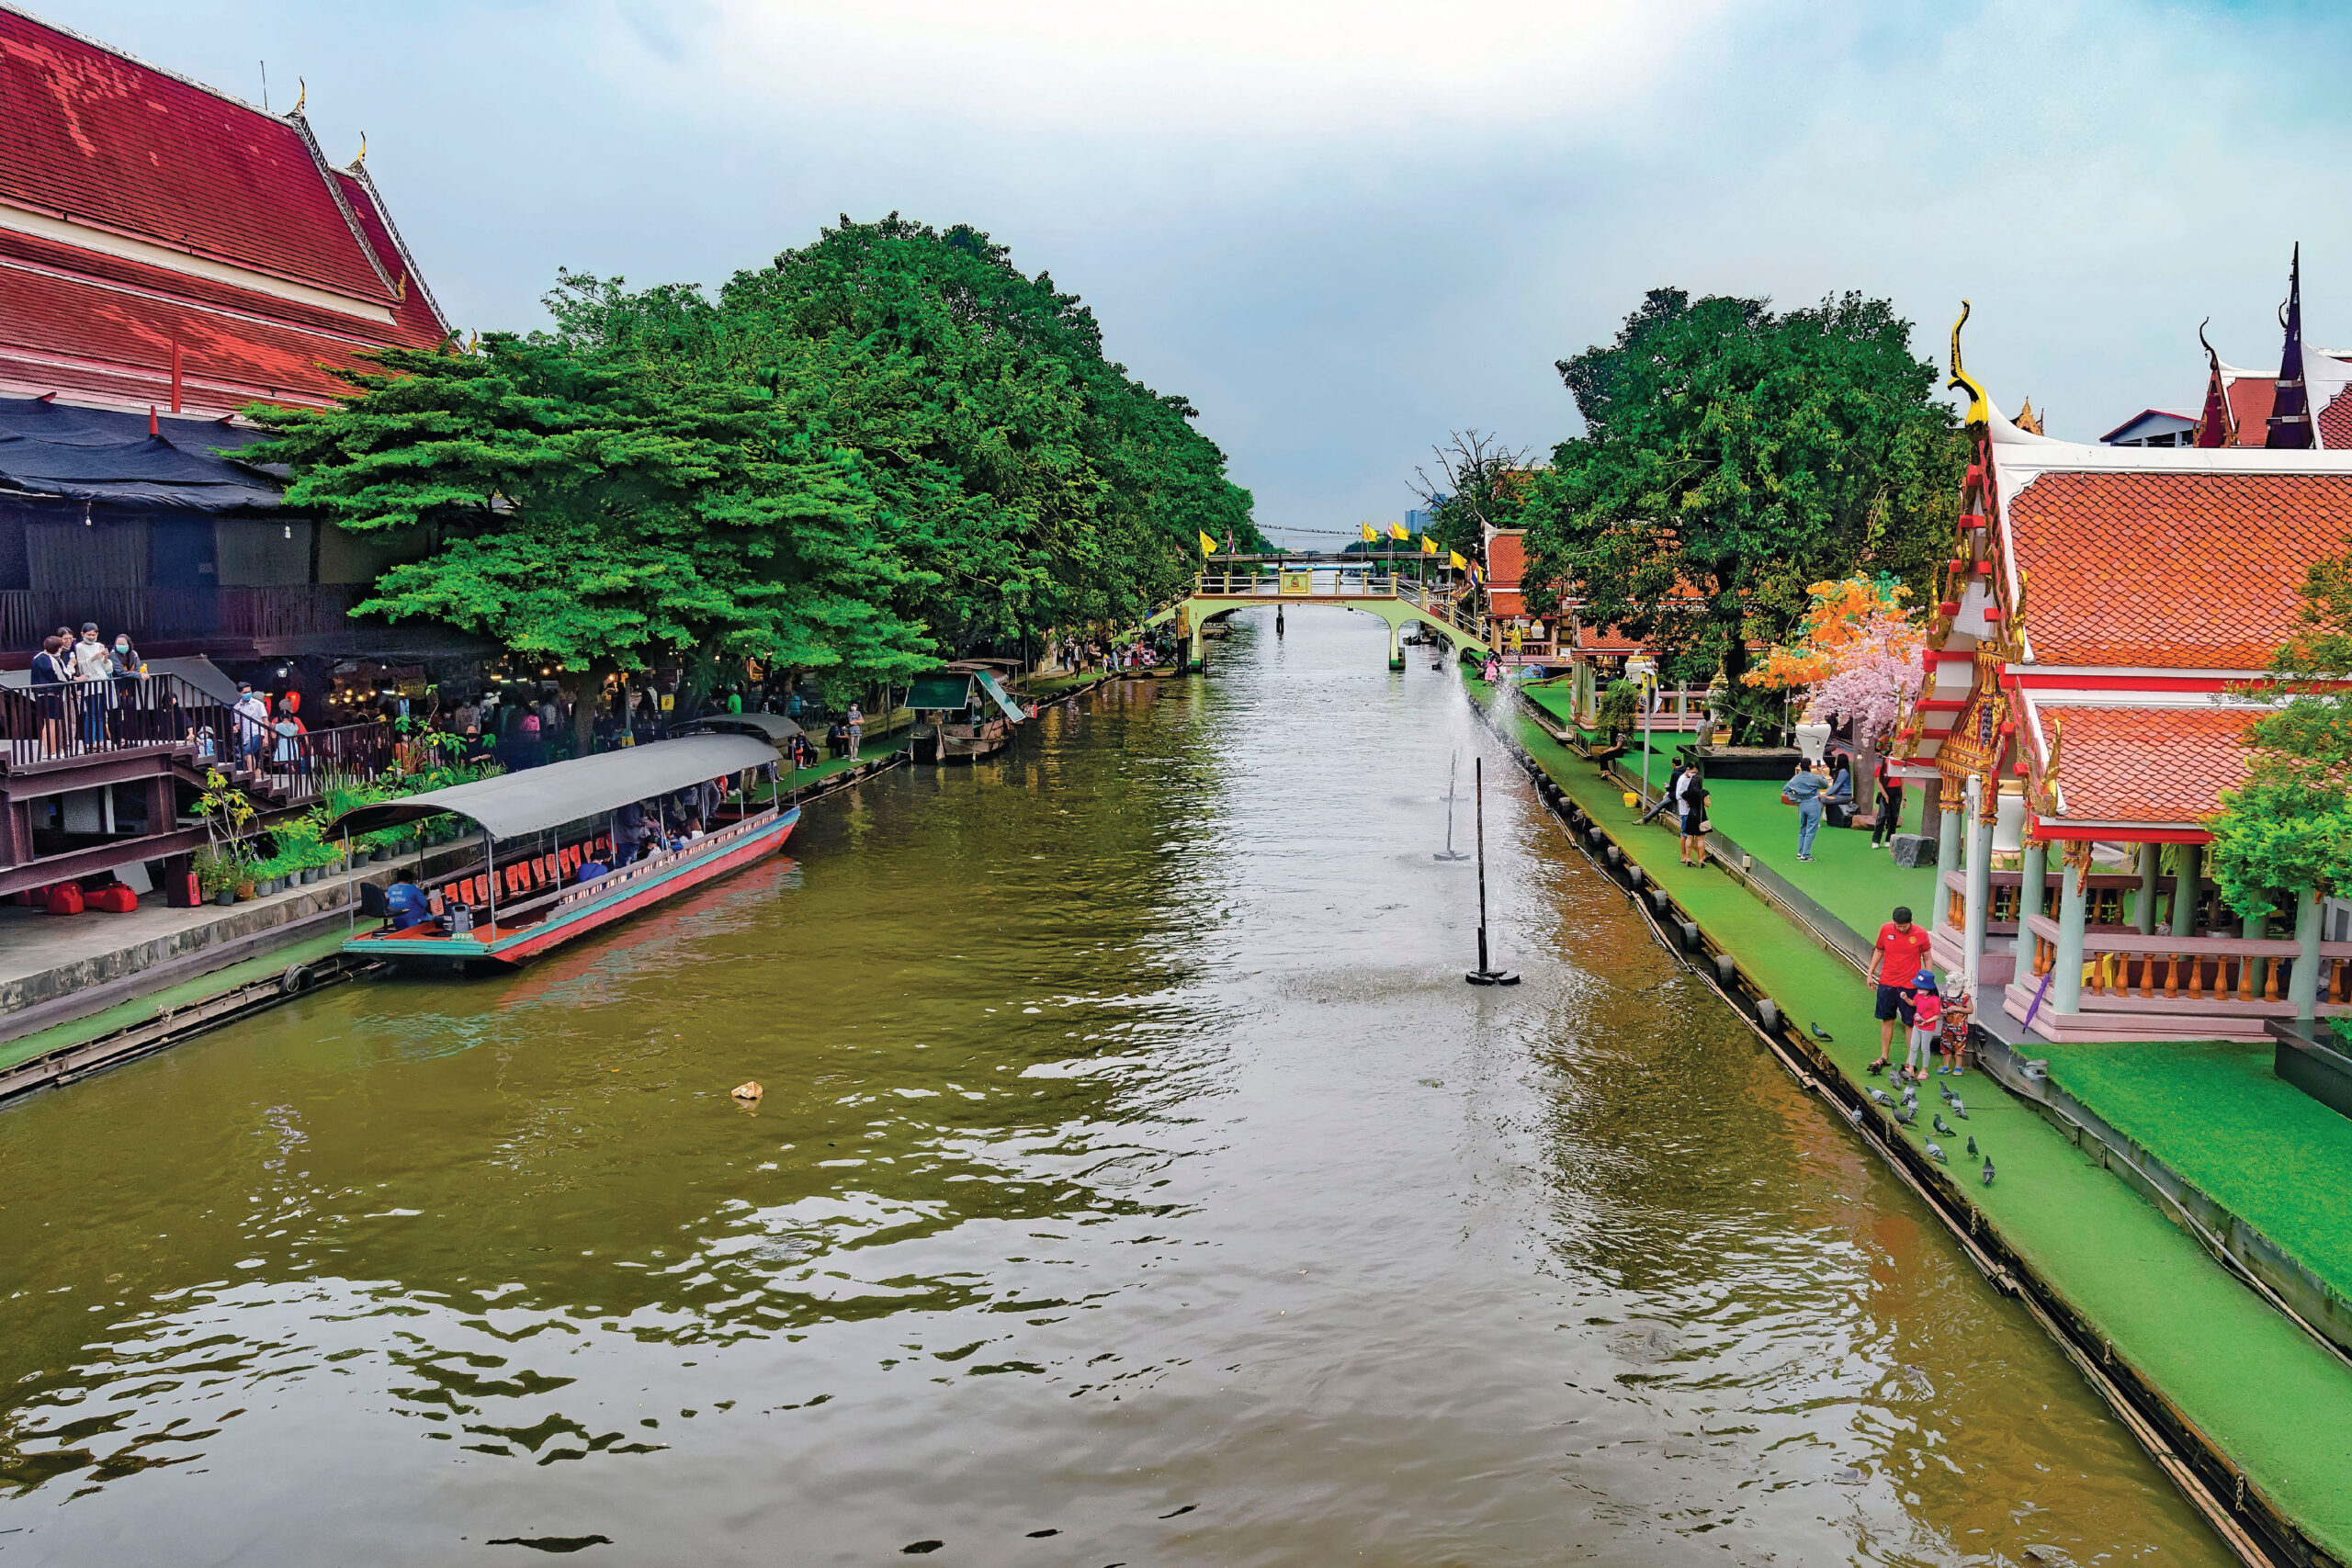 The Vibrant and Classic “Kwan-Riam” Floating Market